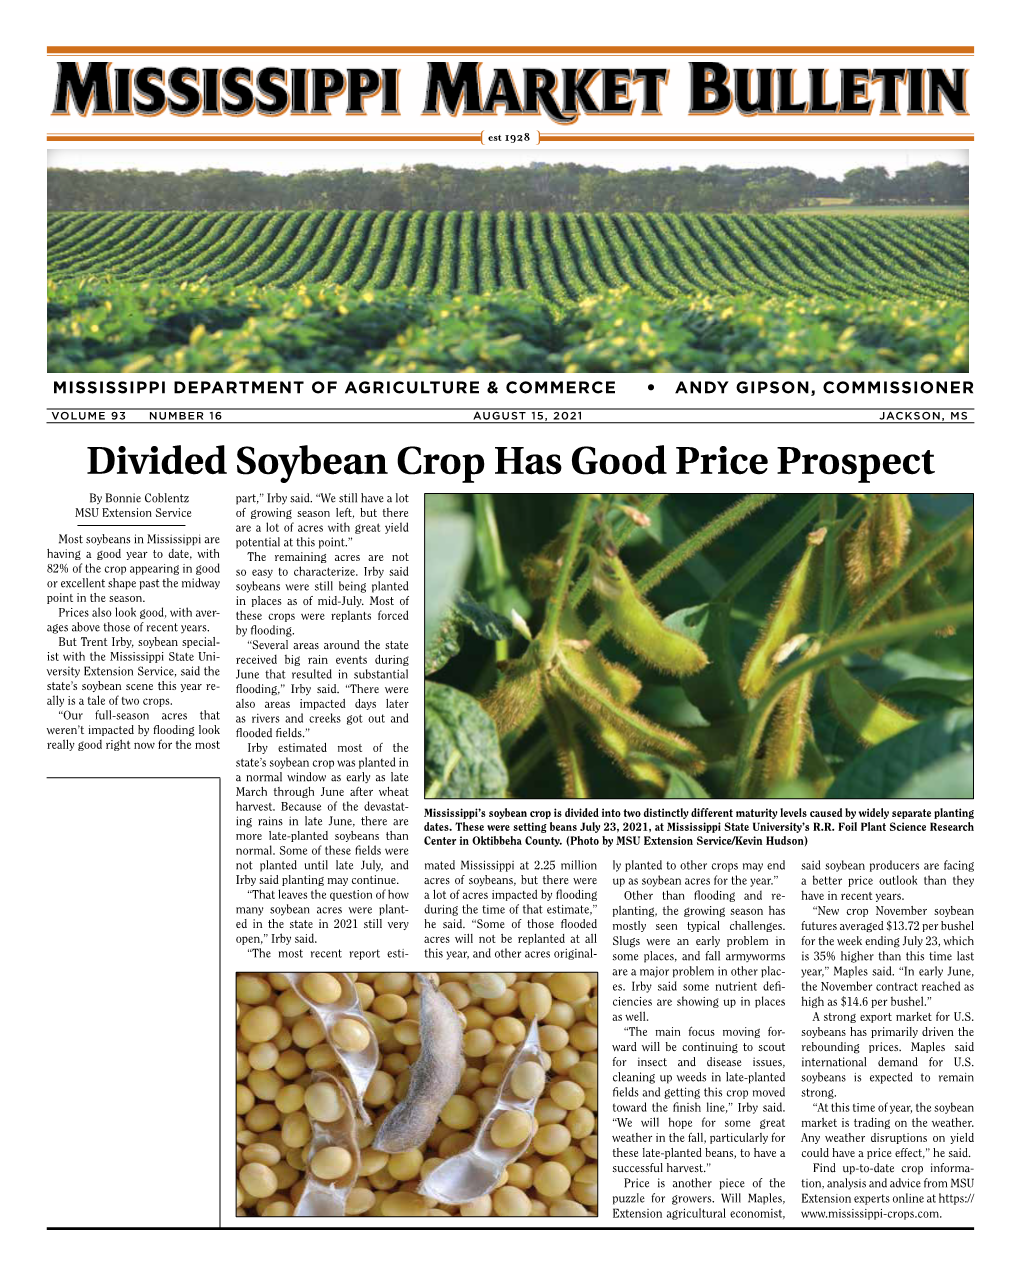 AUGUST 15, 2021 JACKSON, MS Divided Soybean Crop Has Good Price Prospect by Bonnie Coblentz Part,” Irby Said